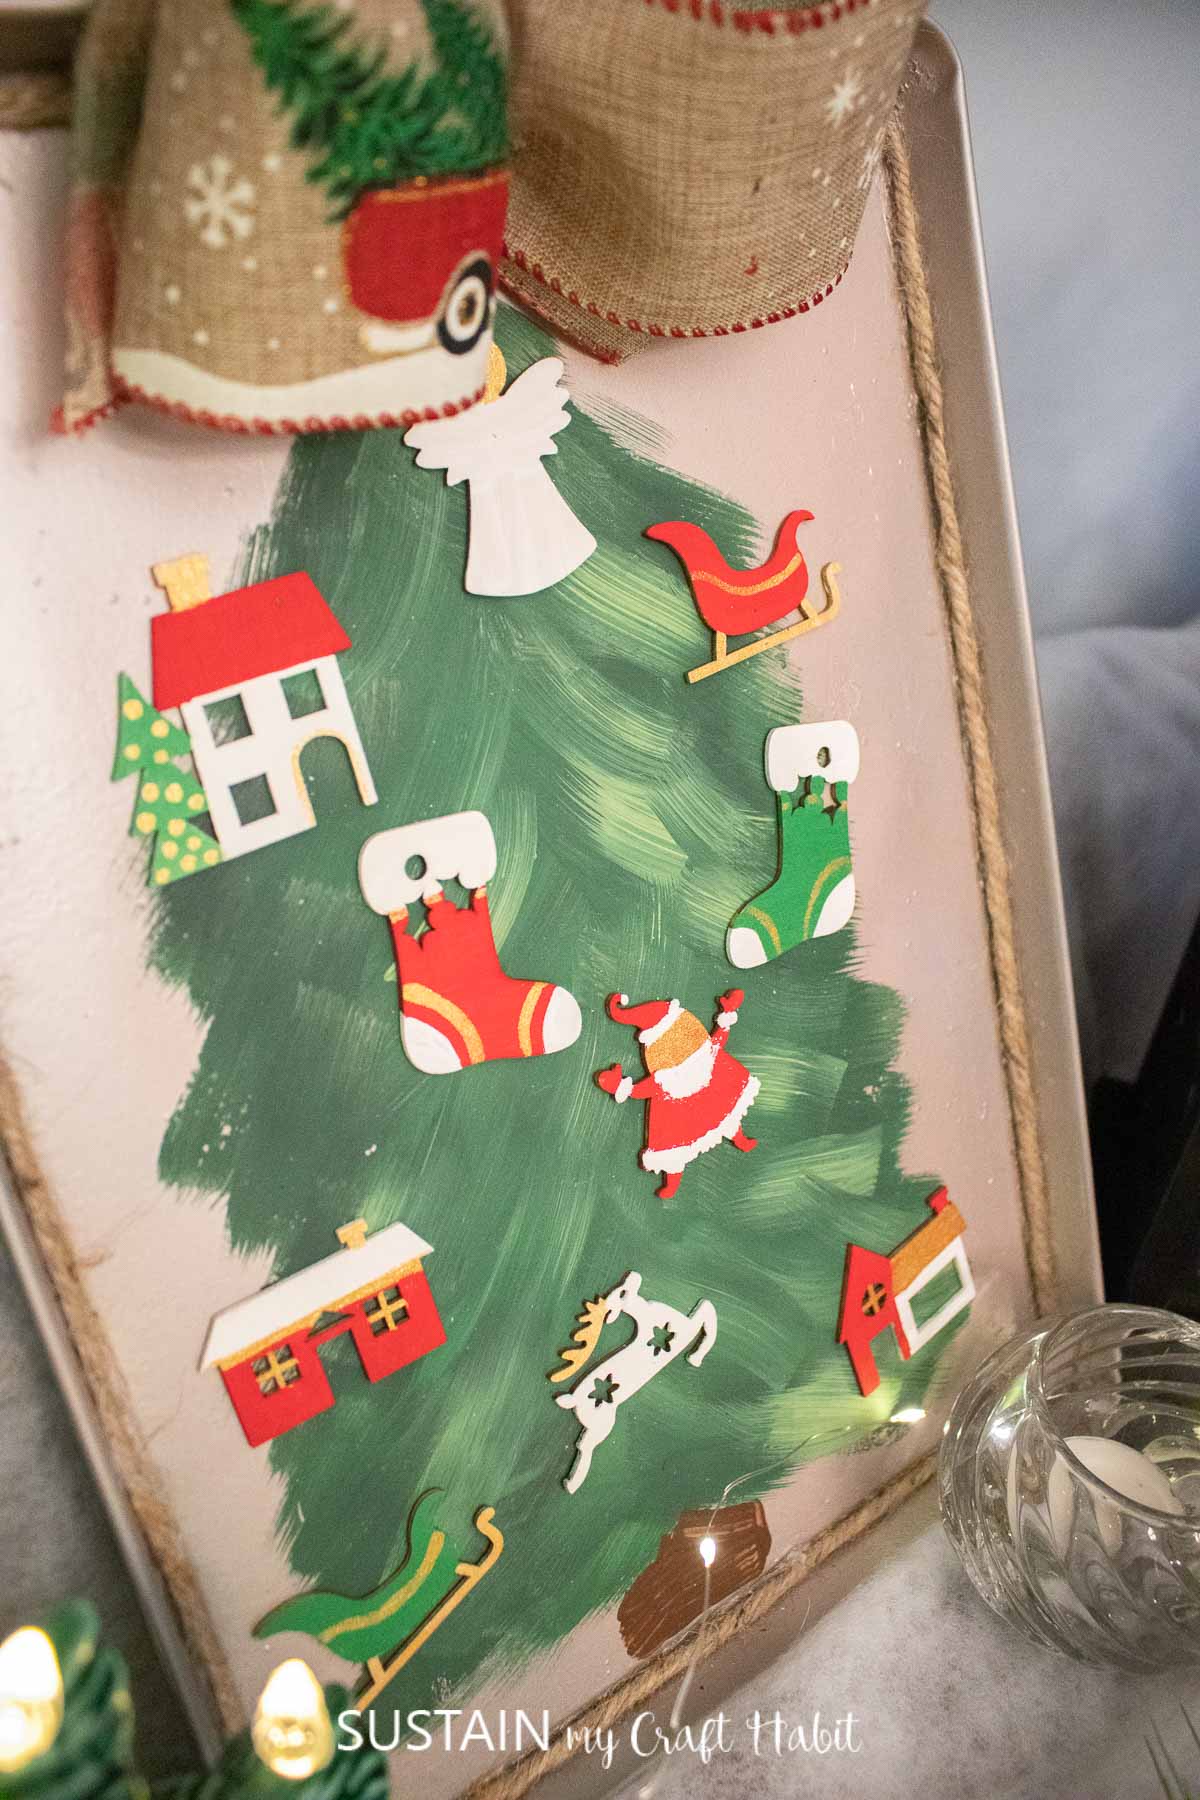 Cookie sheet Christmas craft decorated with a tree and ornaments.